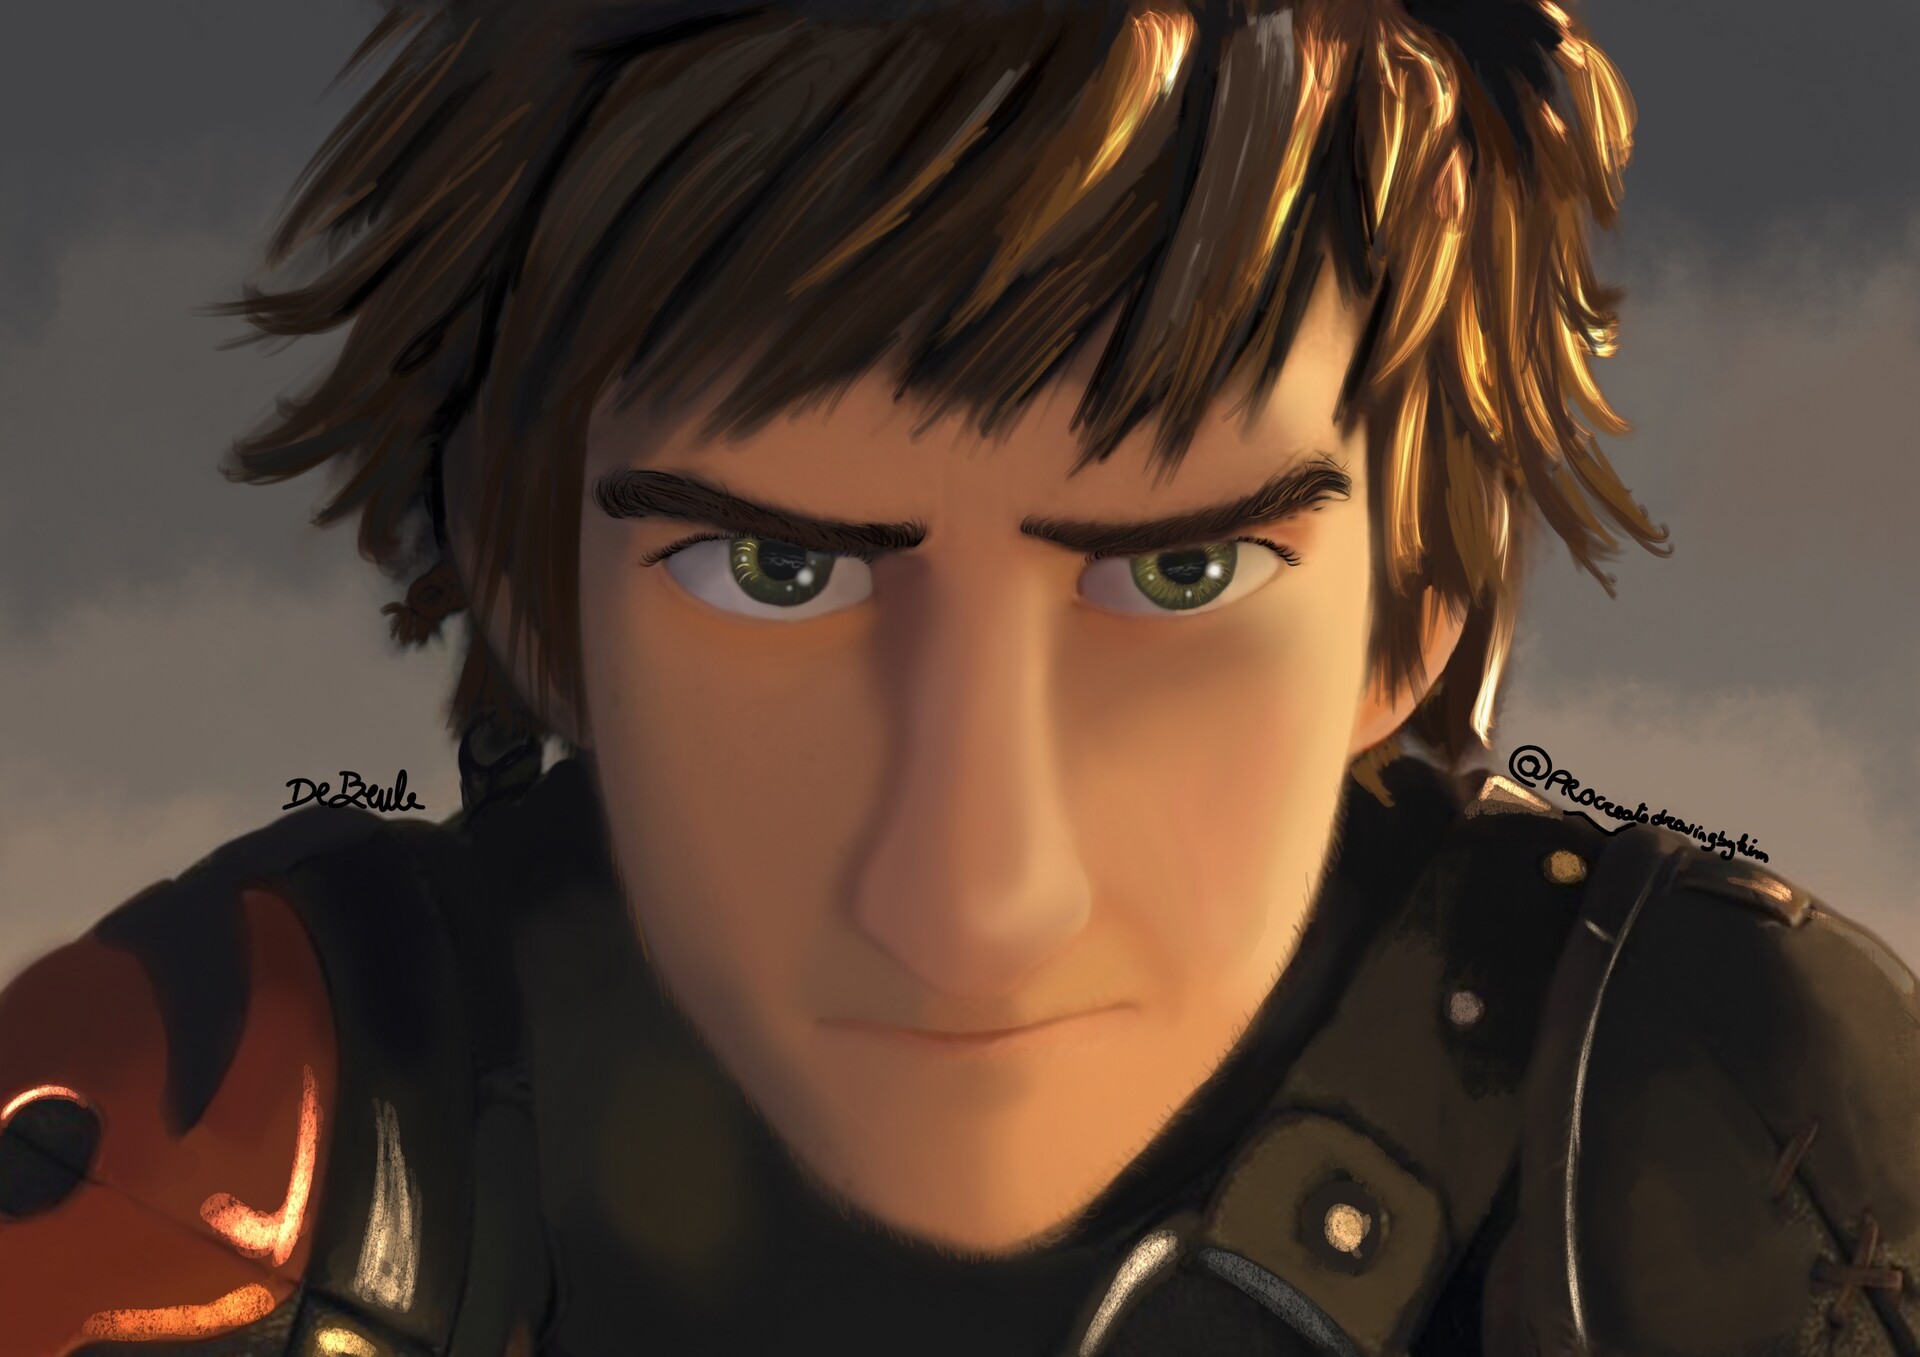 Hiccup the chief.